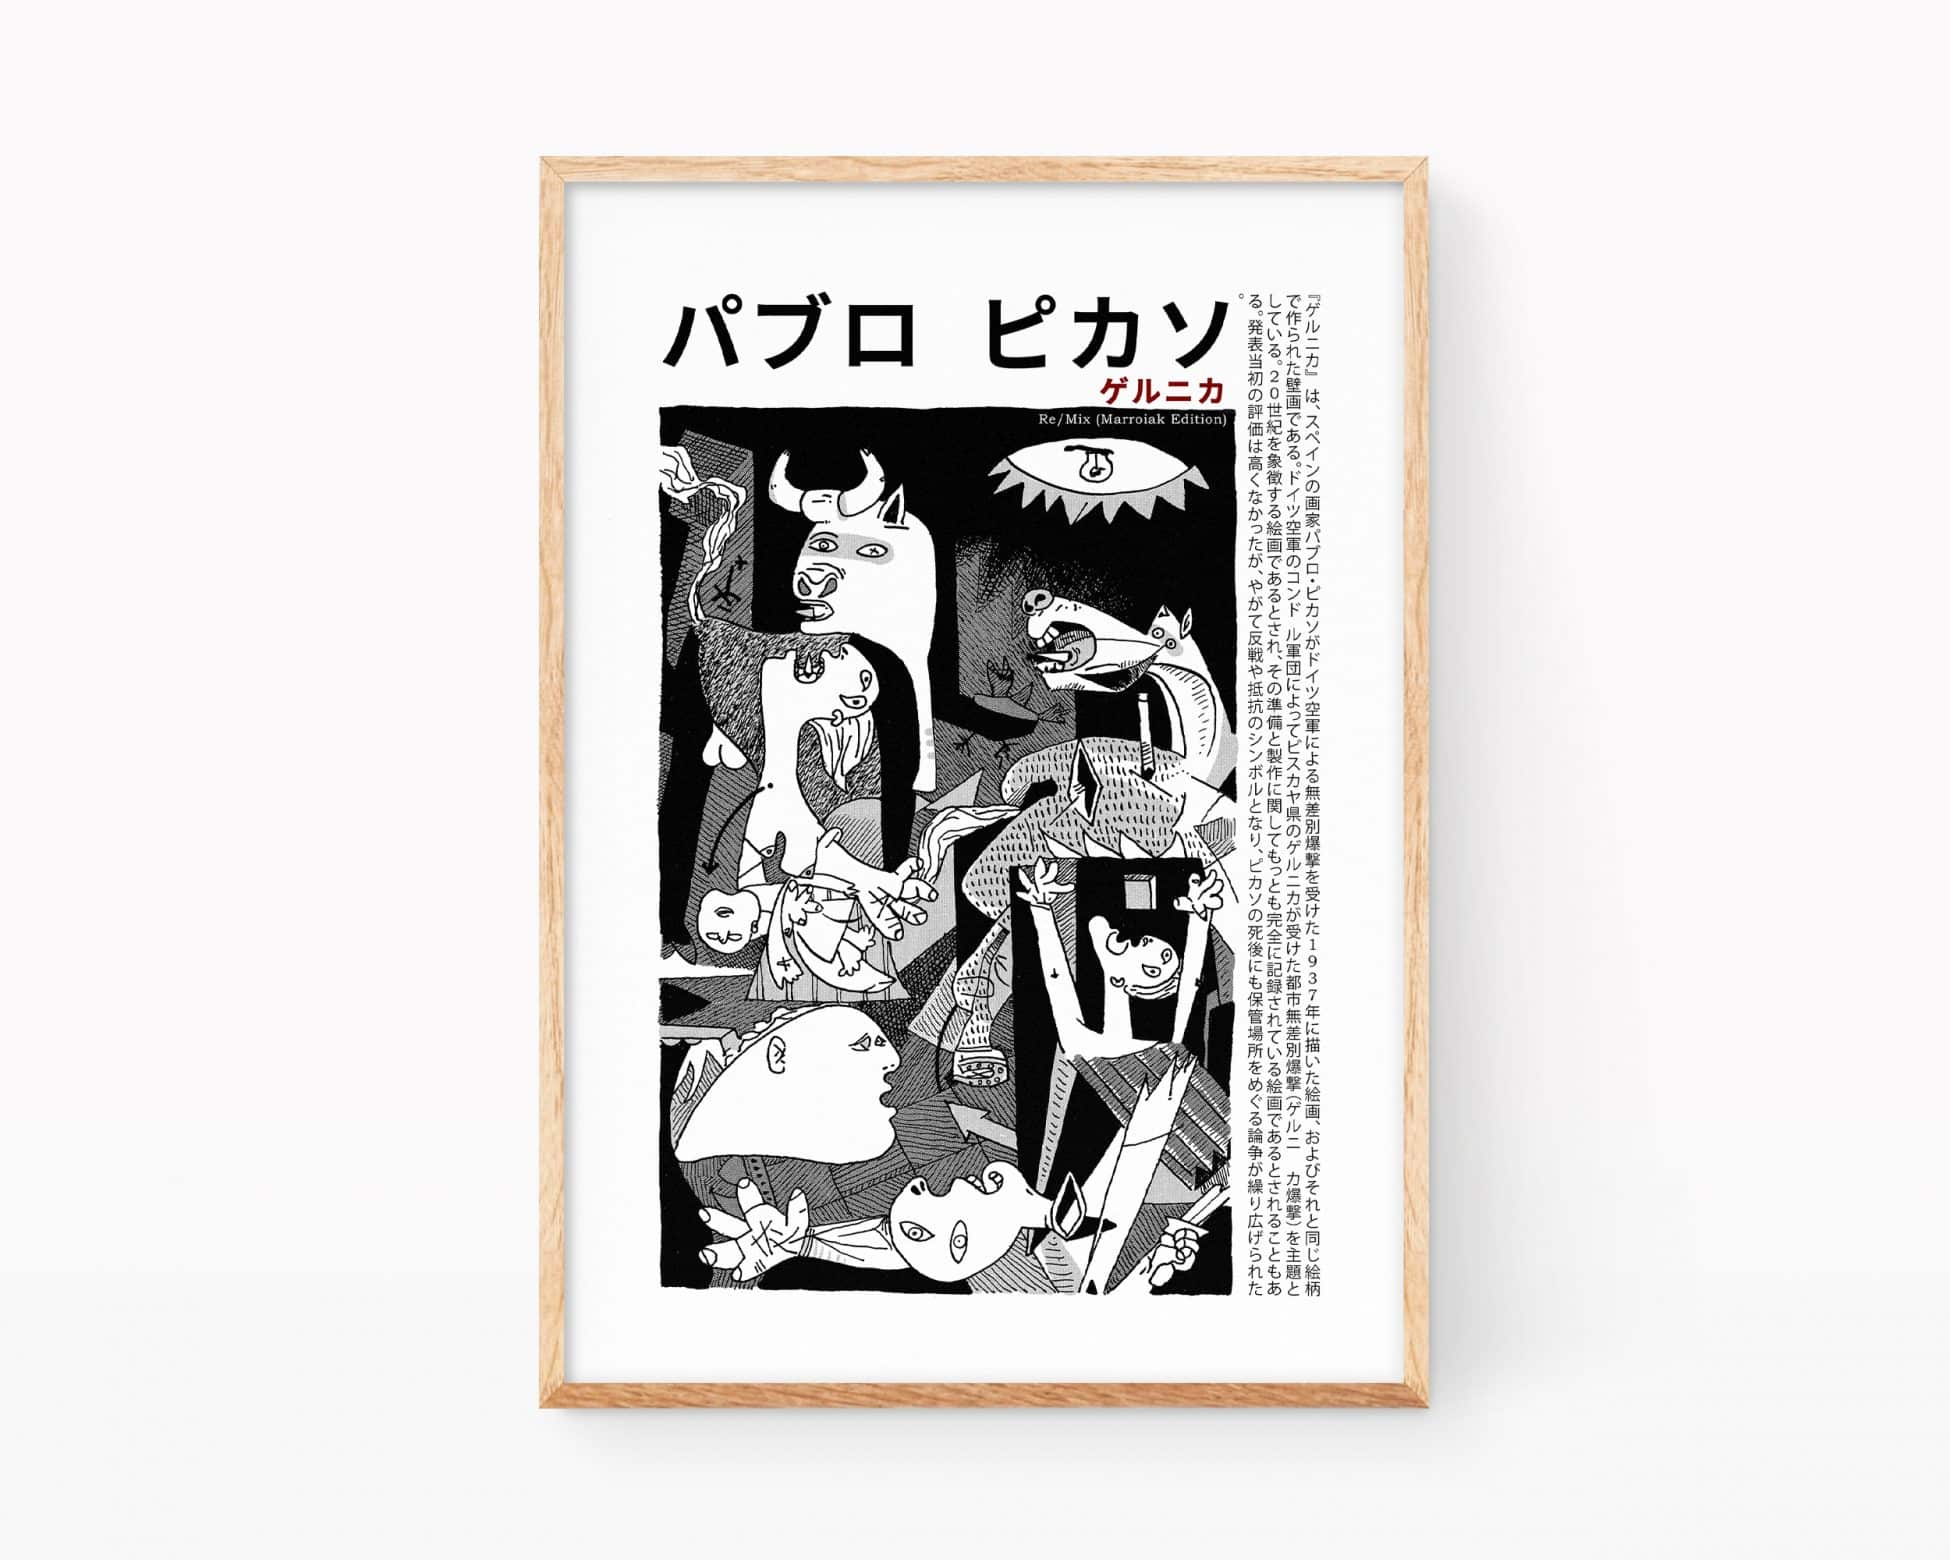 Pablo Picasso Guernica print remix, Japan Museum Edition. Black and white illustration poster